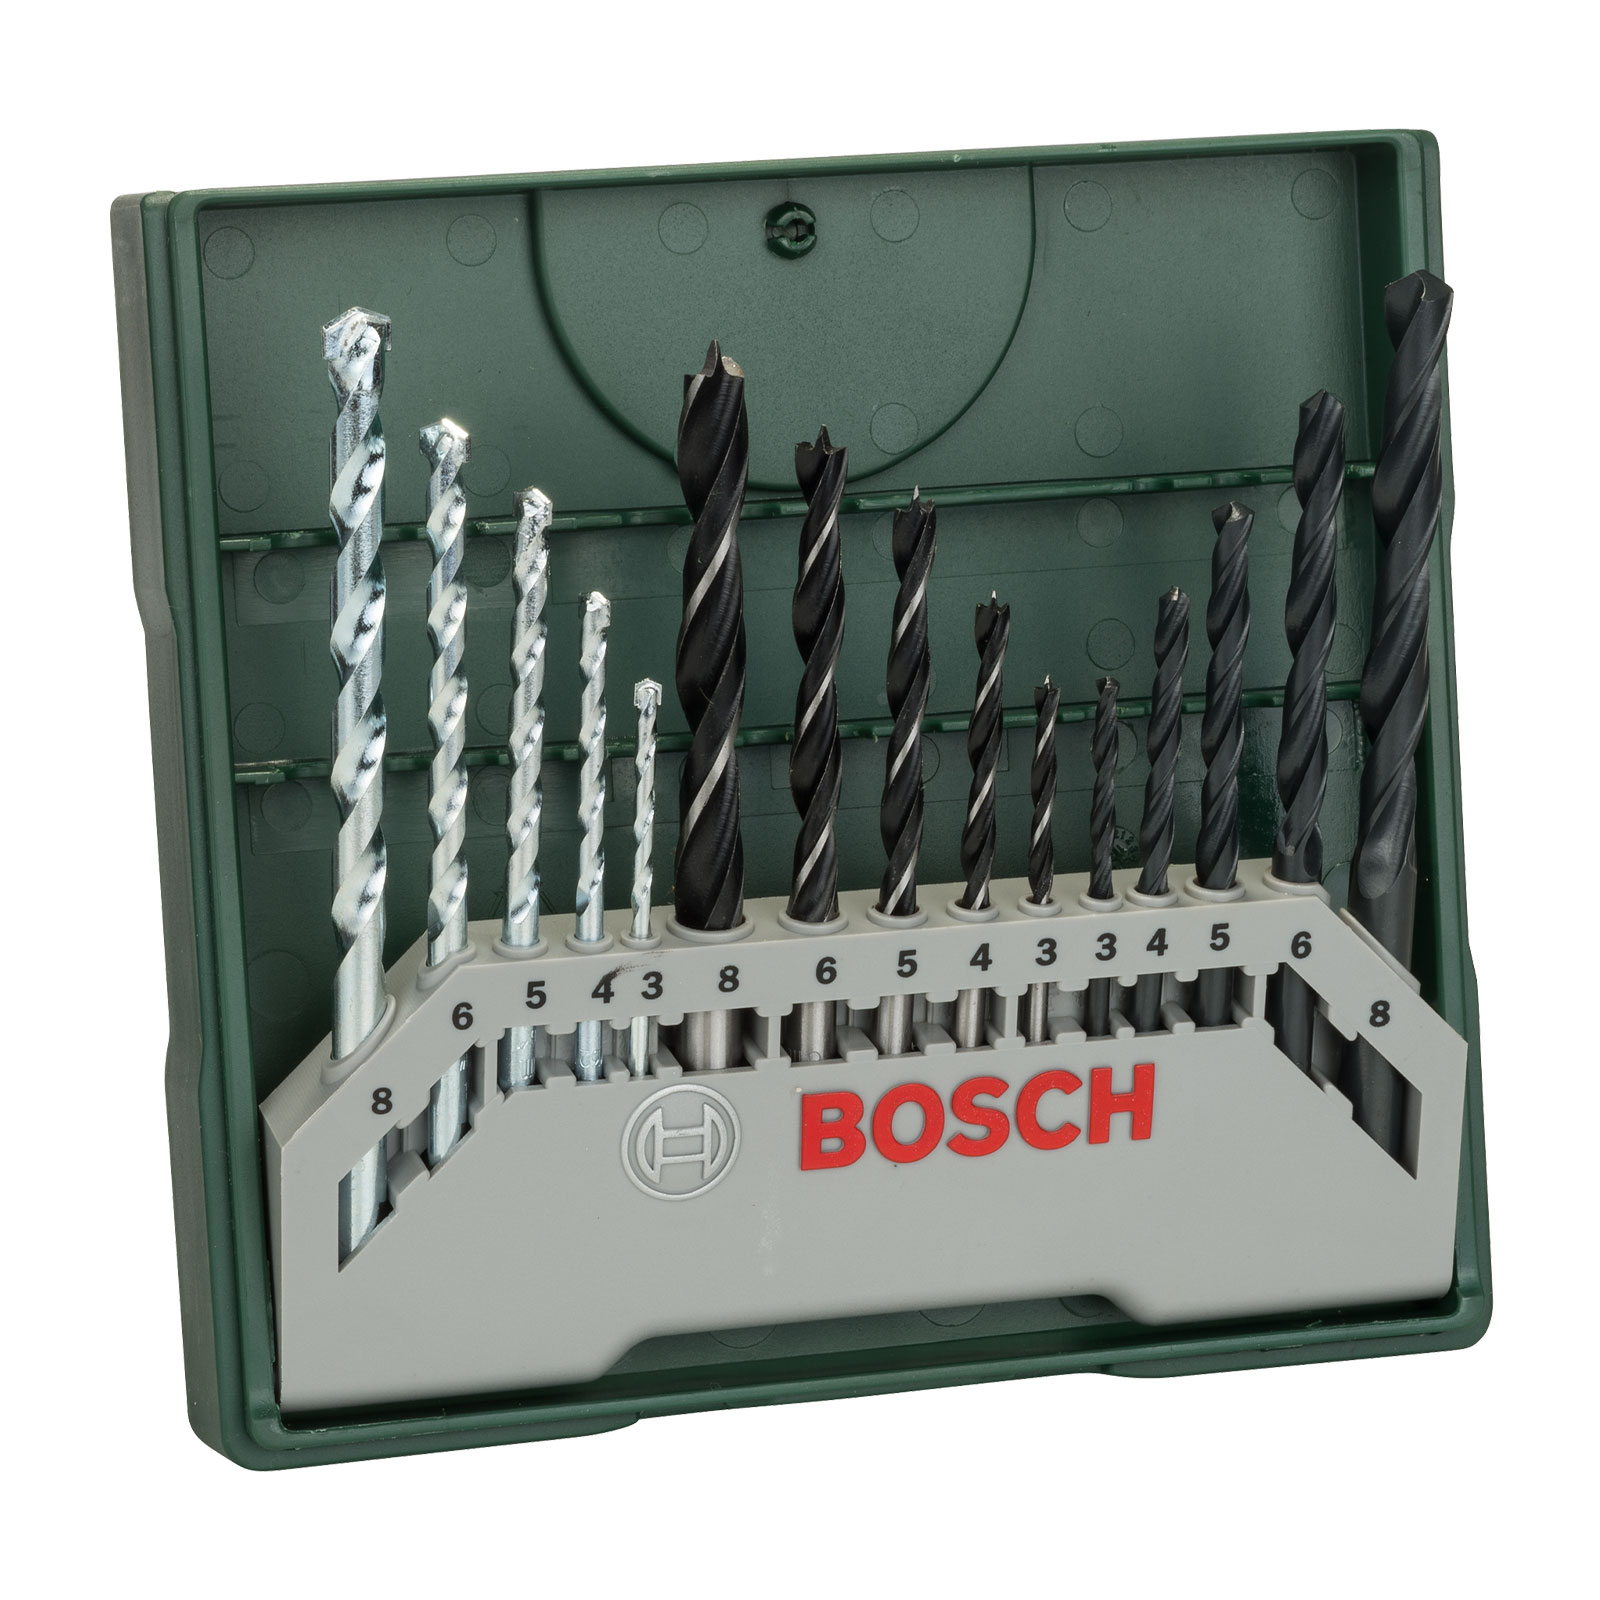 Bosch Professional Mini-X-Line Mixed-Set, 15-teilig, 5 Stein-, 5 Metall-, 5 Holzbohrer